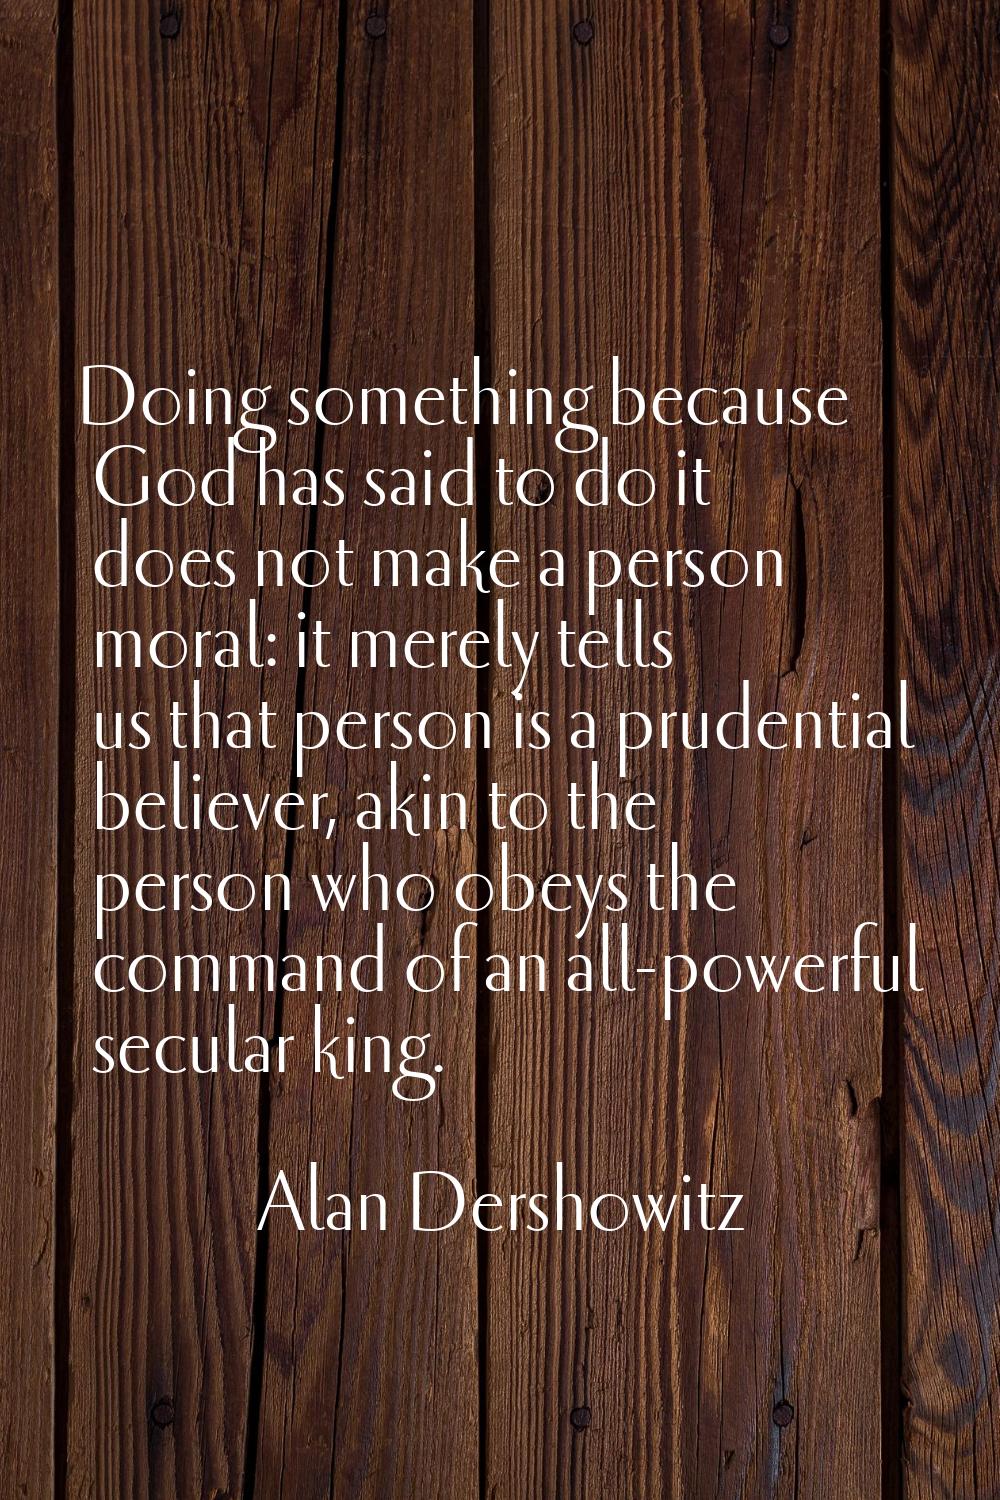 Doing something because God has said to do it does not make a person moral: it merely tells us that